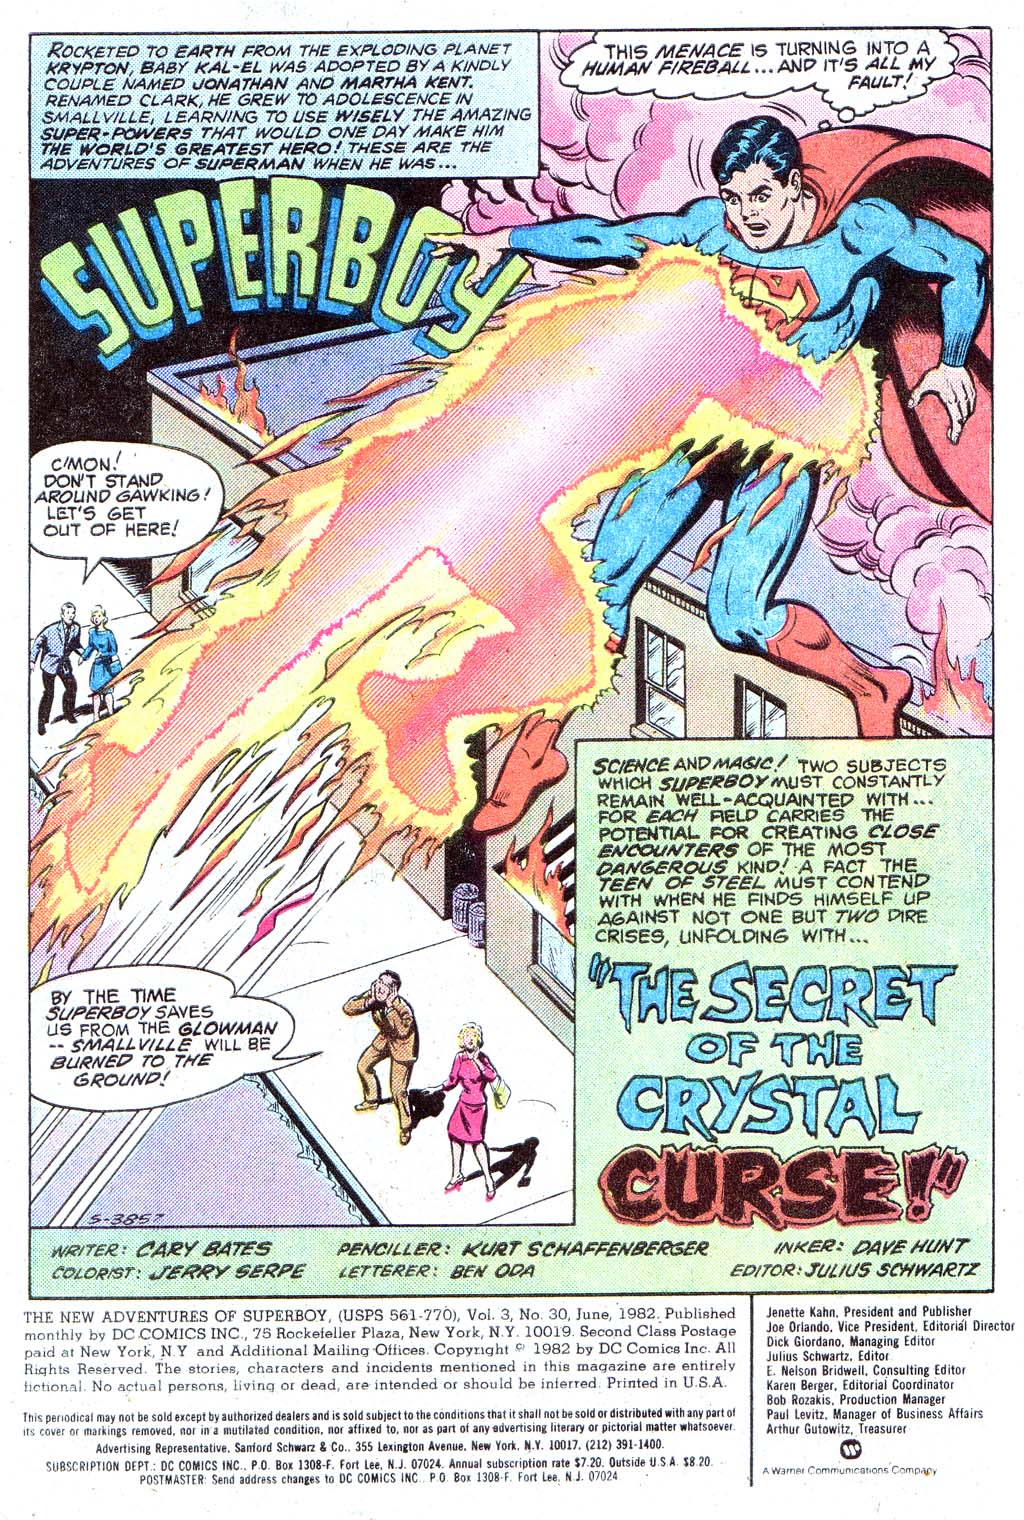 The New Adventures of Superboy 30 Page 2